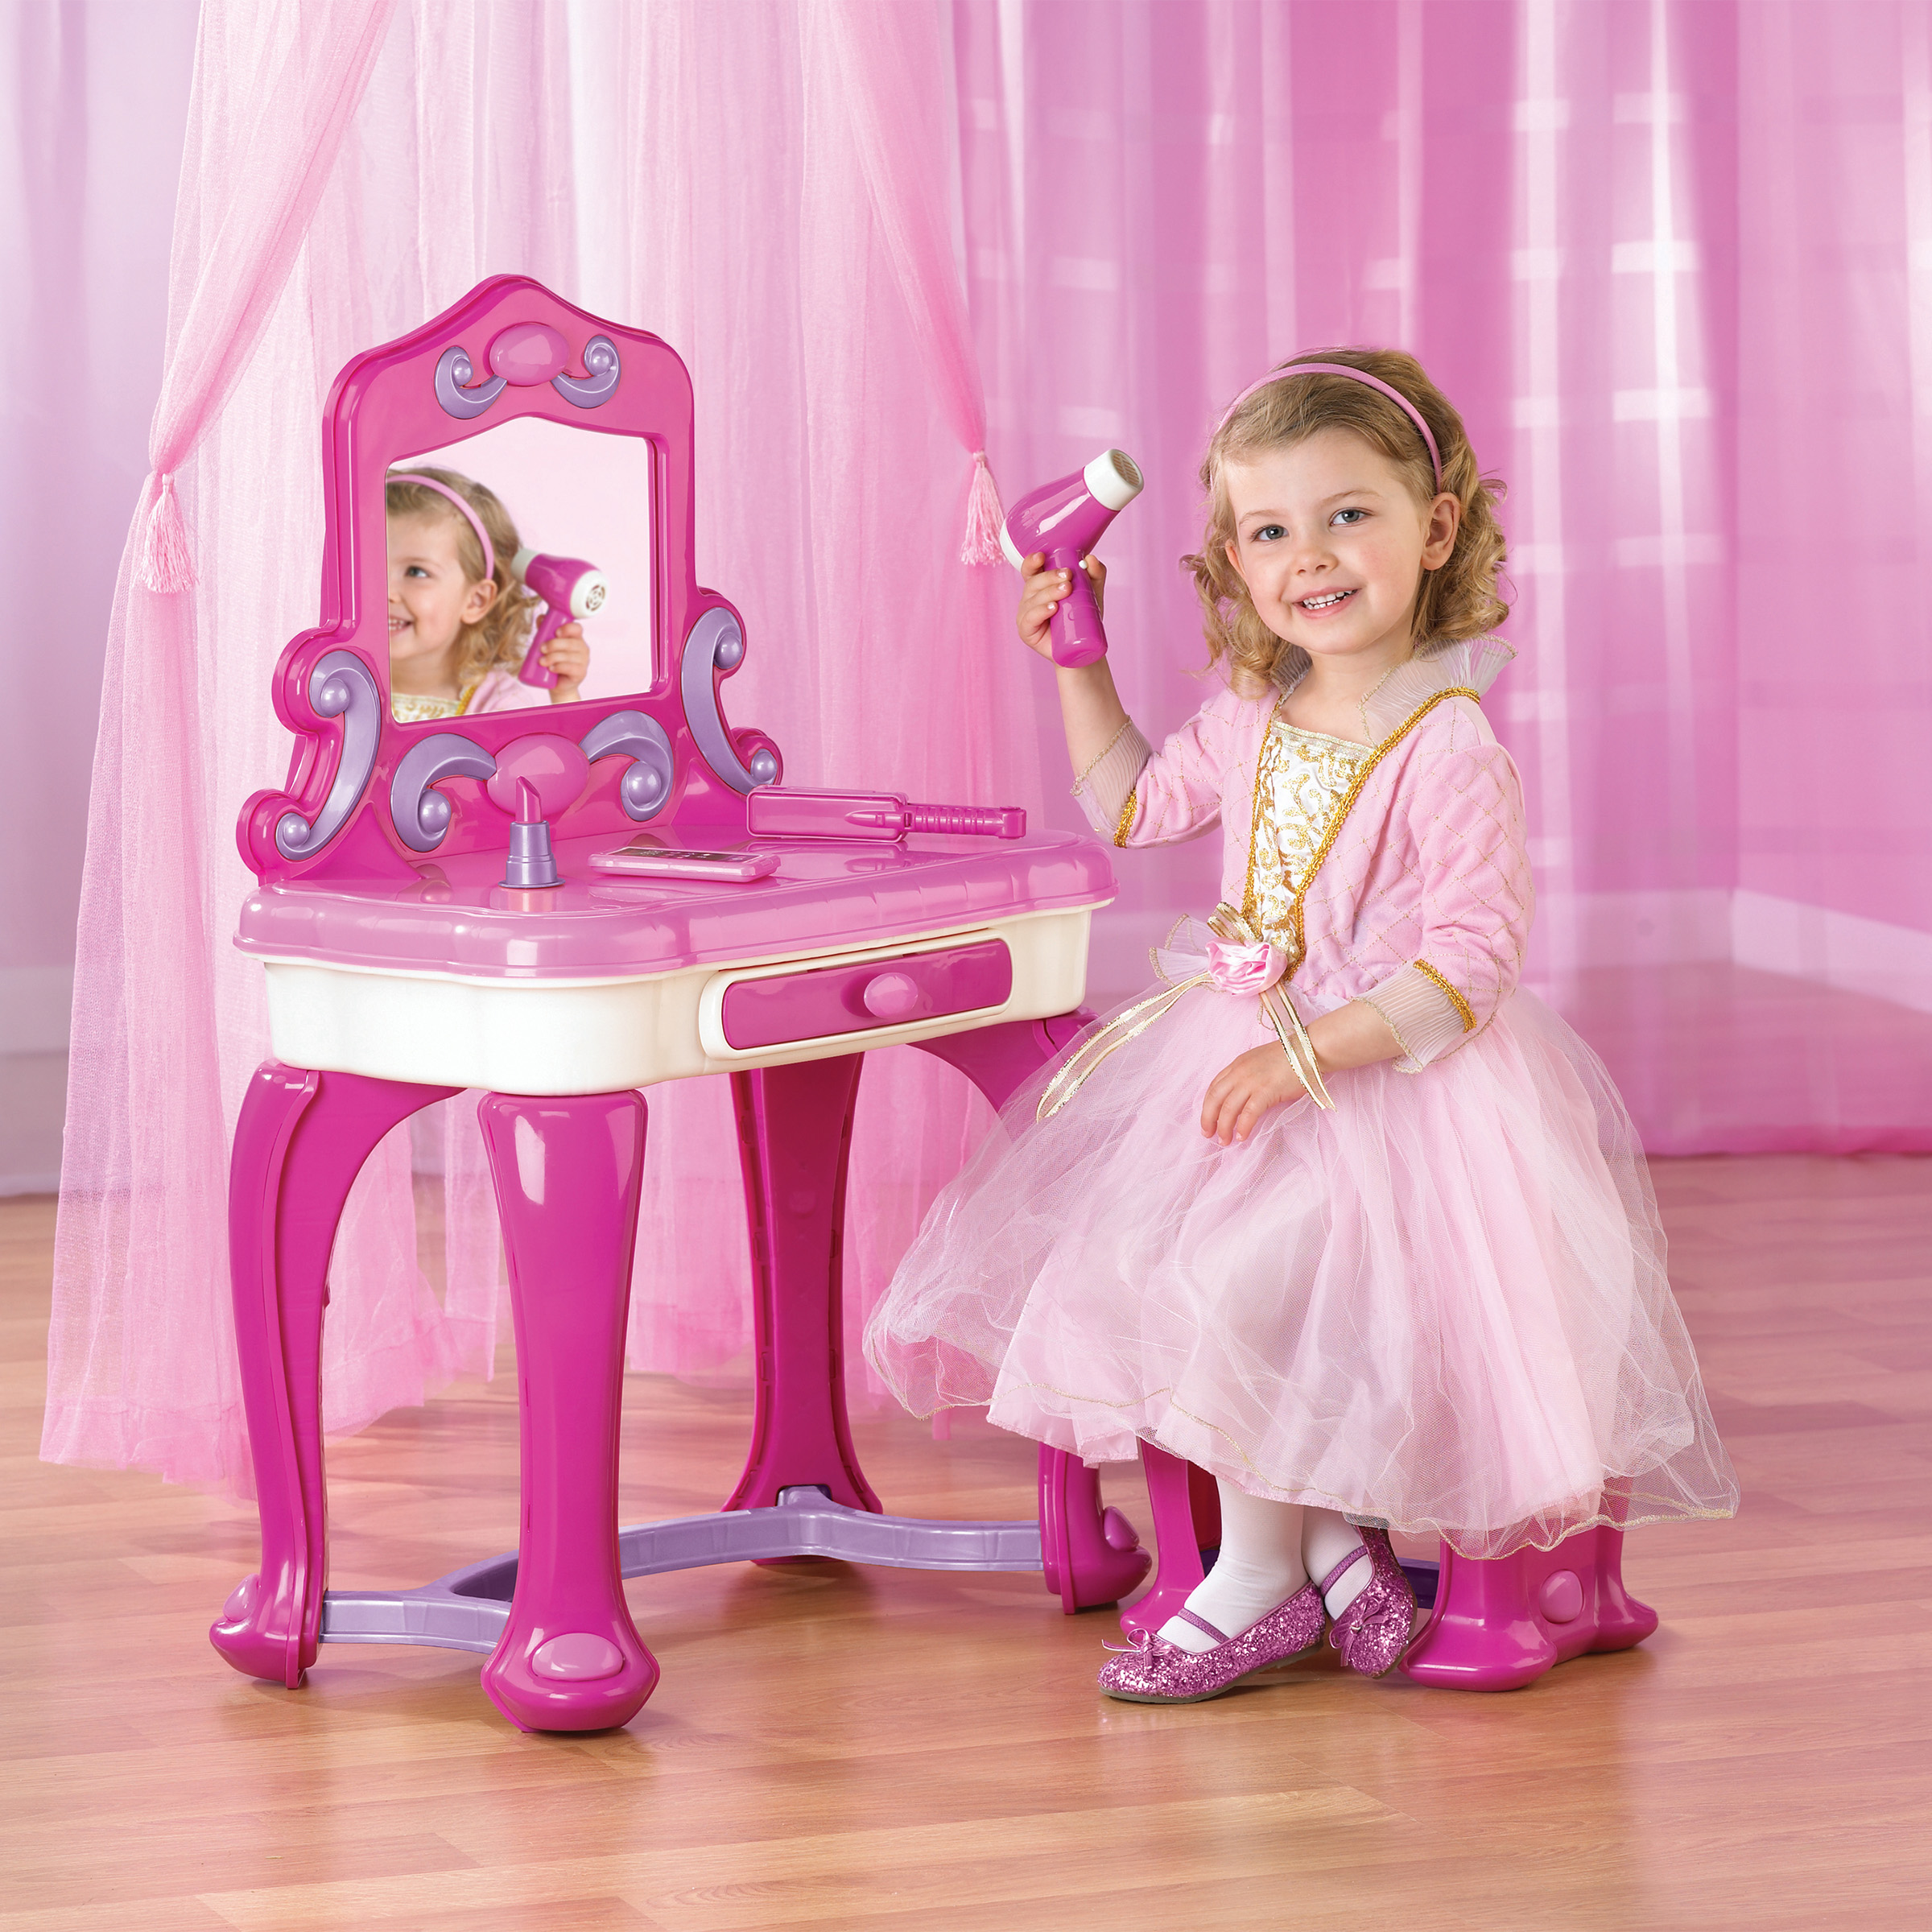 American Plastic Toys Kids My Very Own Pink Deluxe Vanity Play Set with Mirror - image 2 of 5